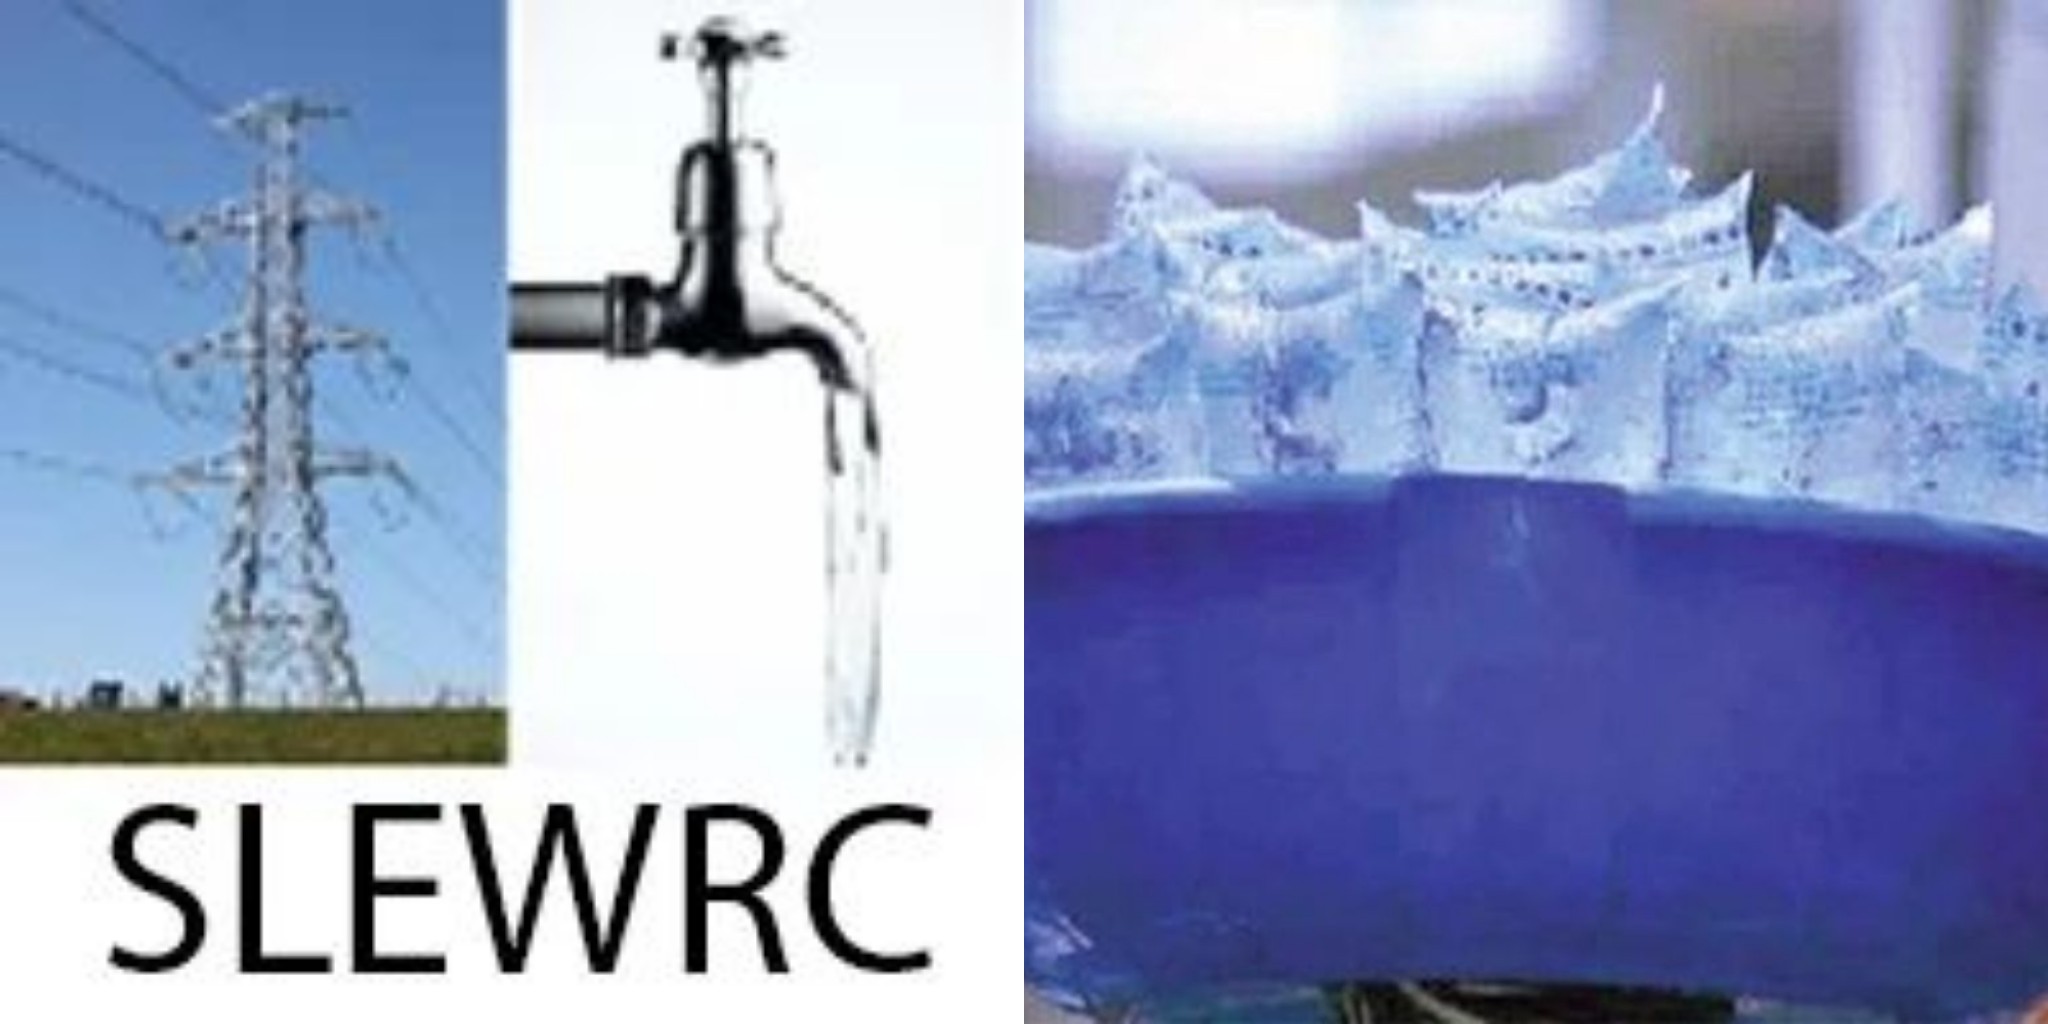 “No retailer Should Sell Sachets Water Above Le6,000,” – SLEWRC